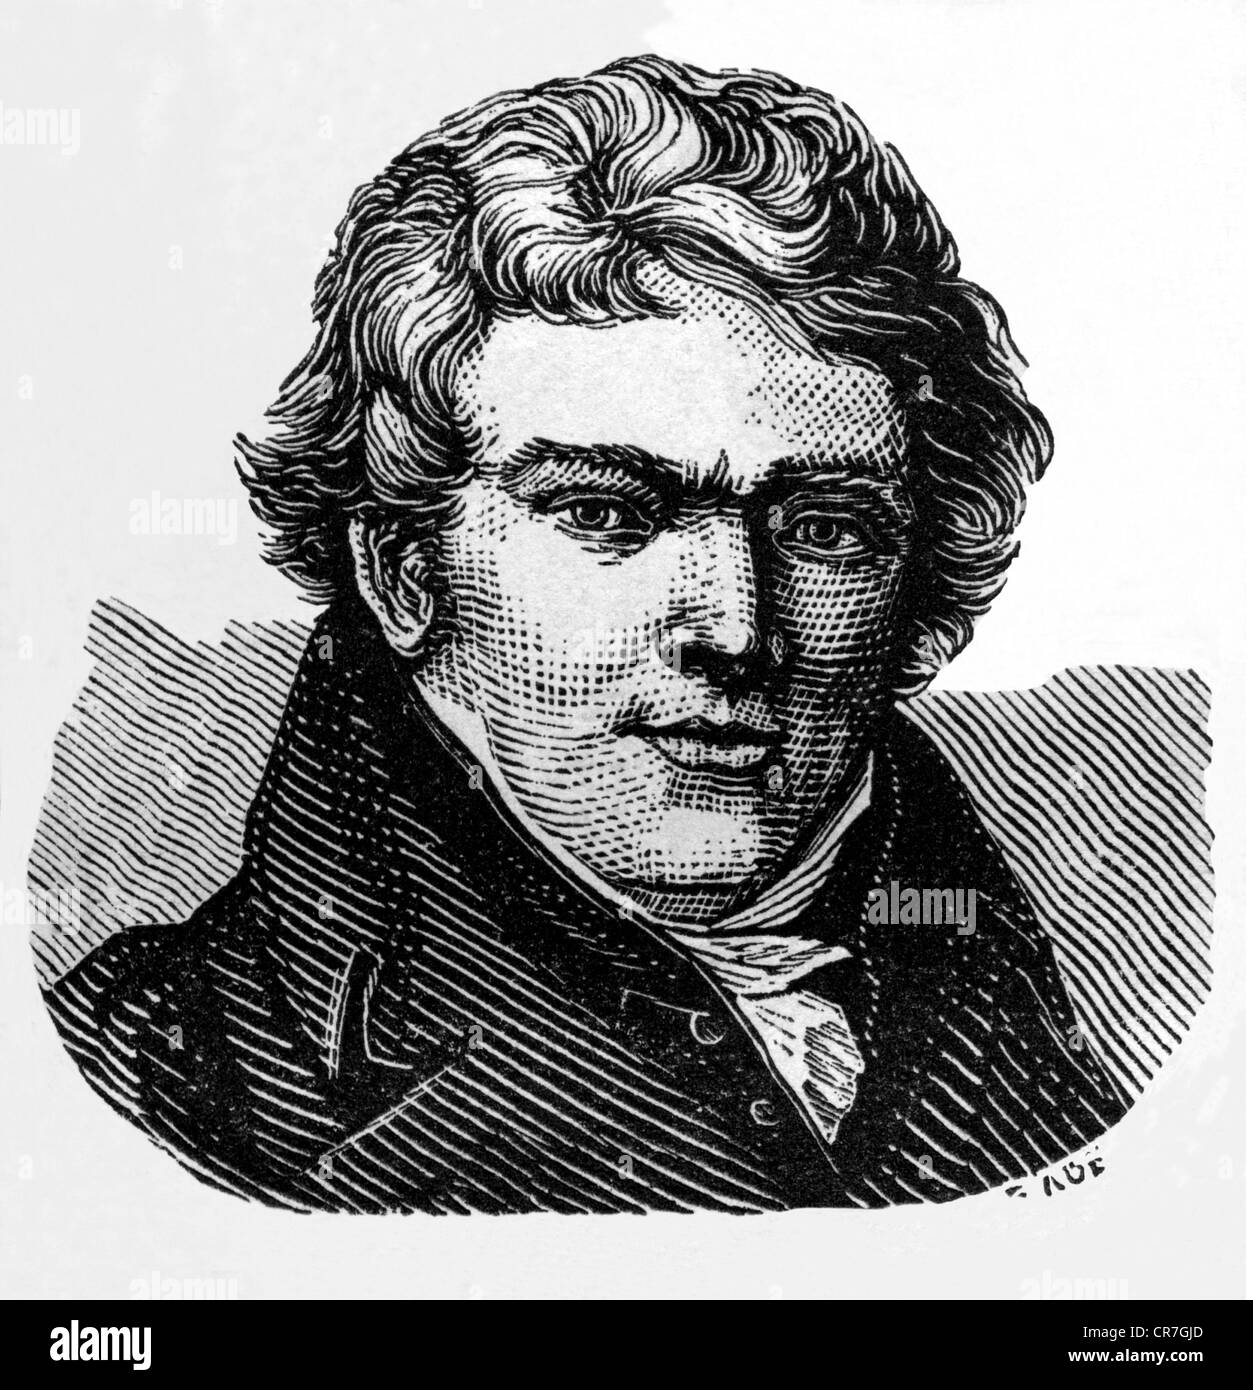 Senefelder, Alois, 6.11.1771 - 26.2.1834, Auastrian inventor of the lithography, portrait, illustration / wood engraving from: 'The world in illustrations', published by the author Dr. Chr. G. Hottinger, Strasbourg / Alsace, 1881, , Stock Photo